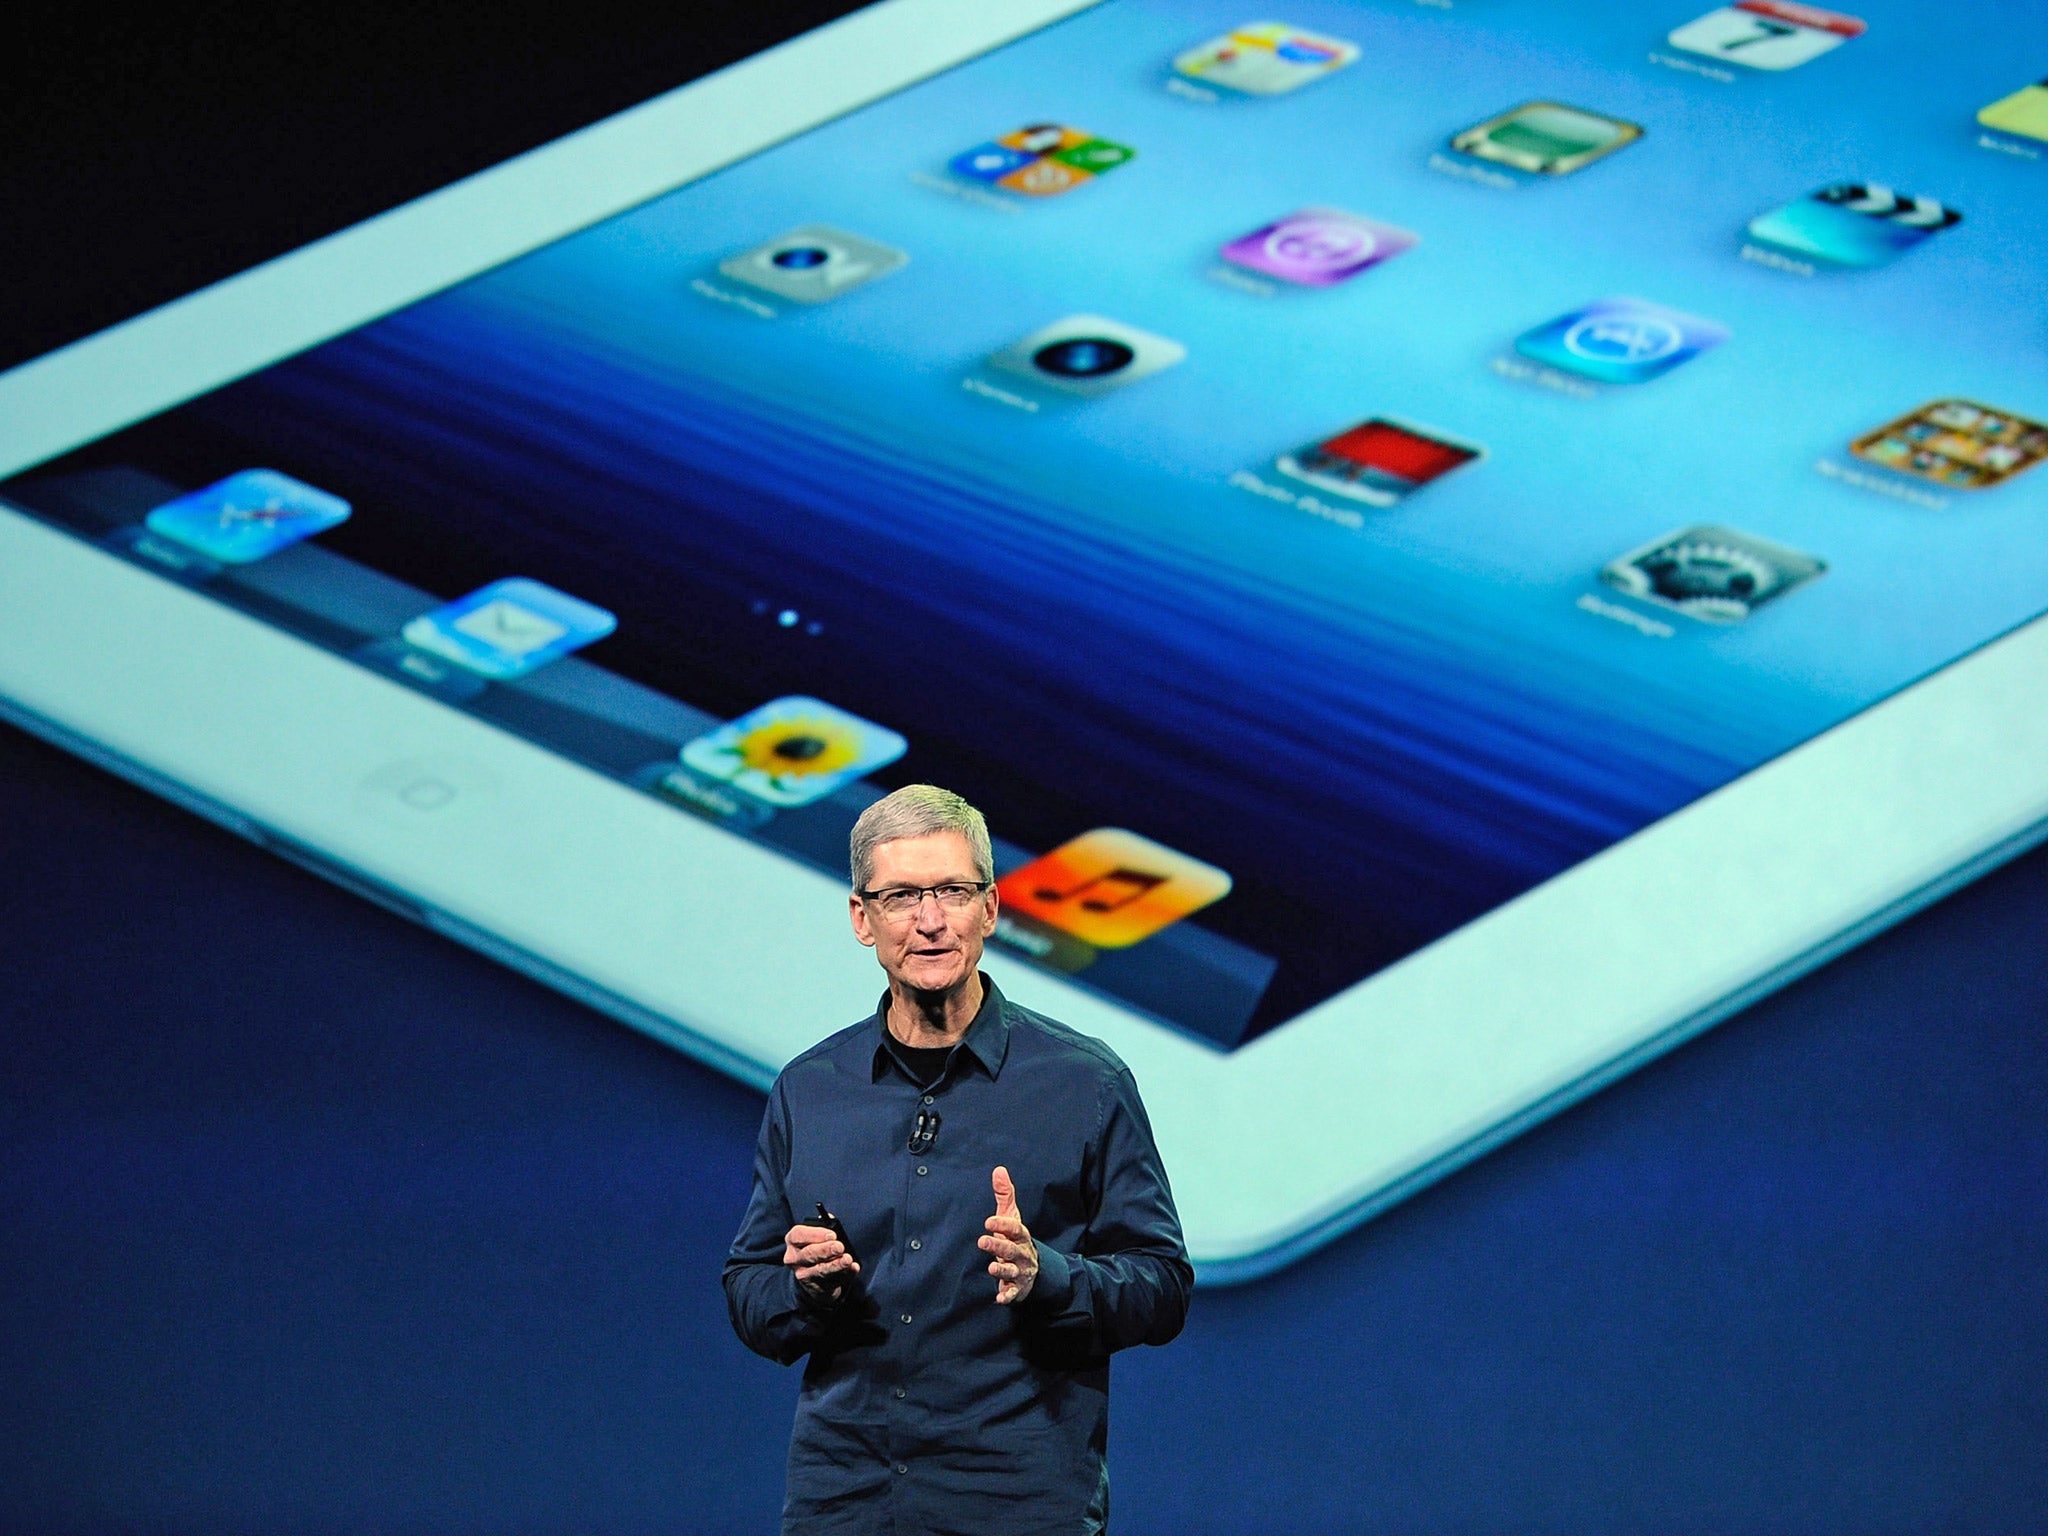 Apple CEO Tim Cook unveiling the latest iPad in 2012